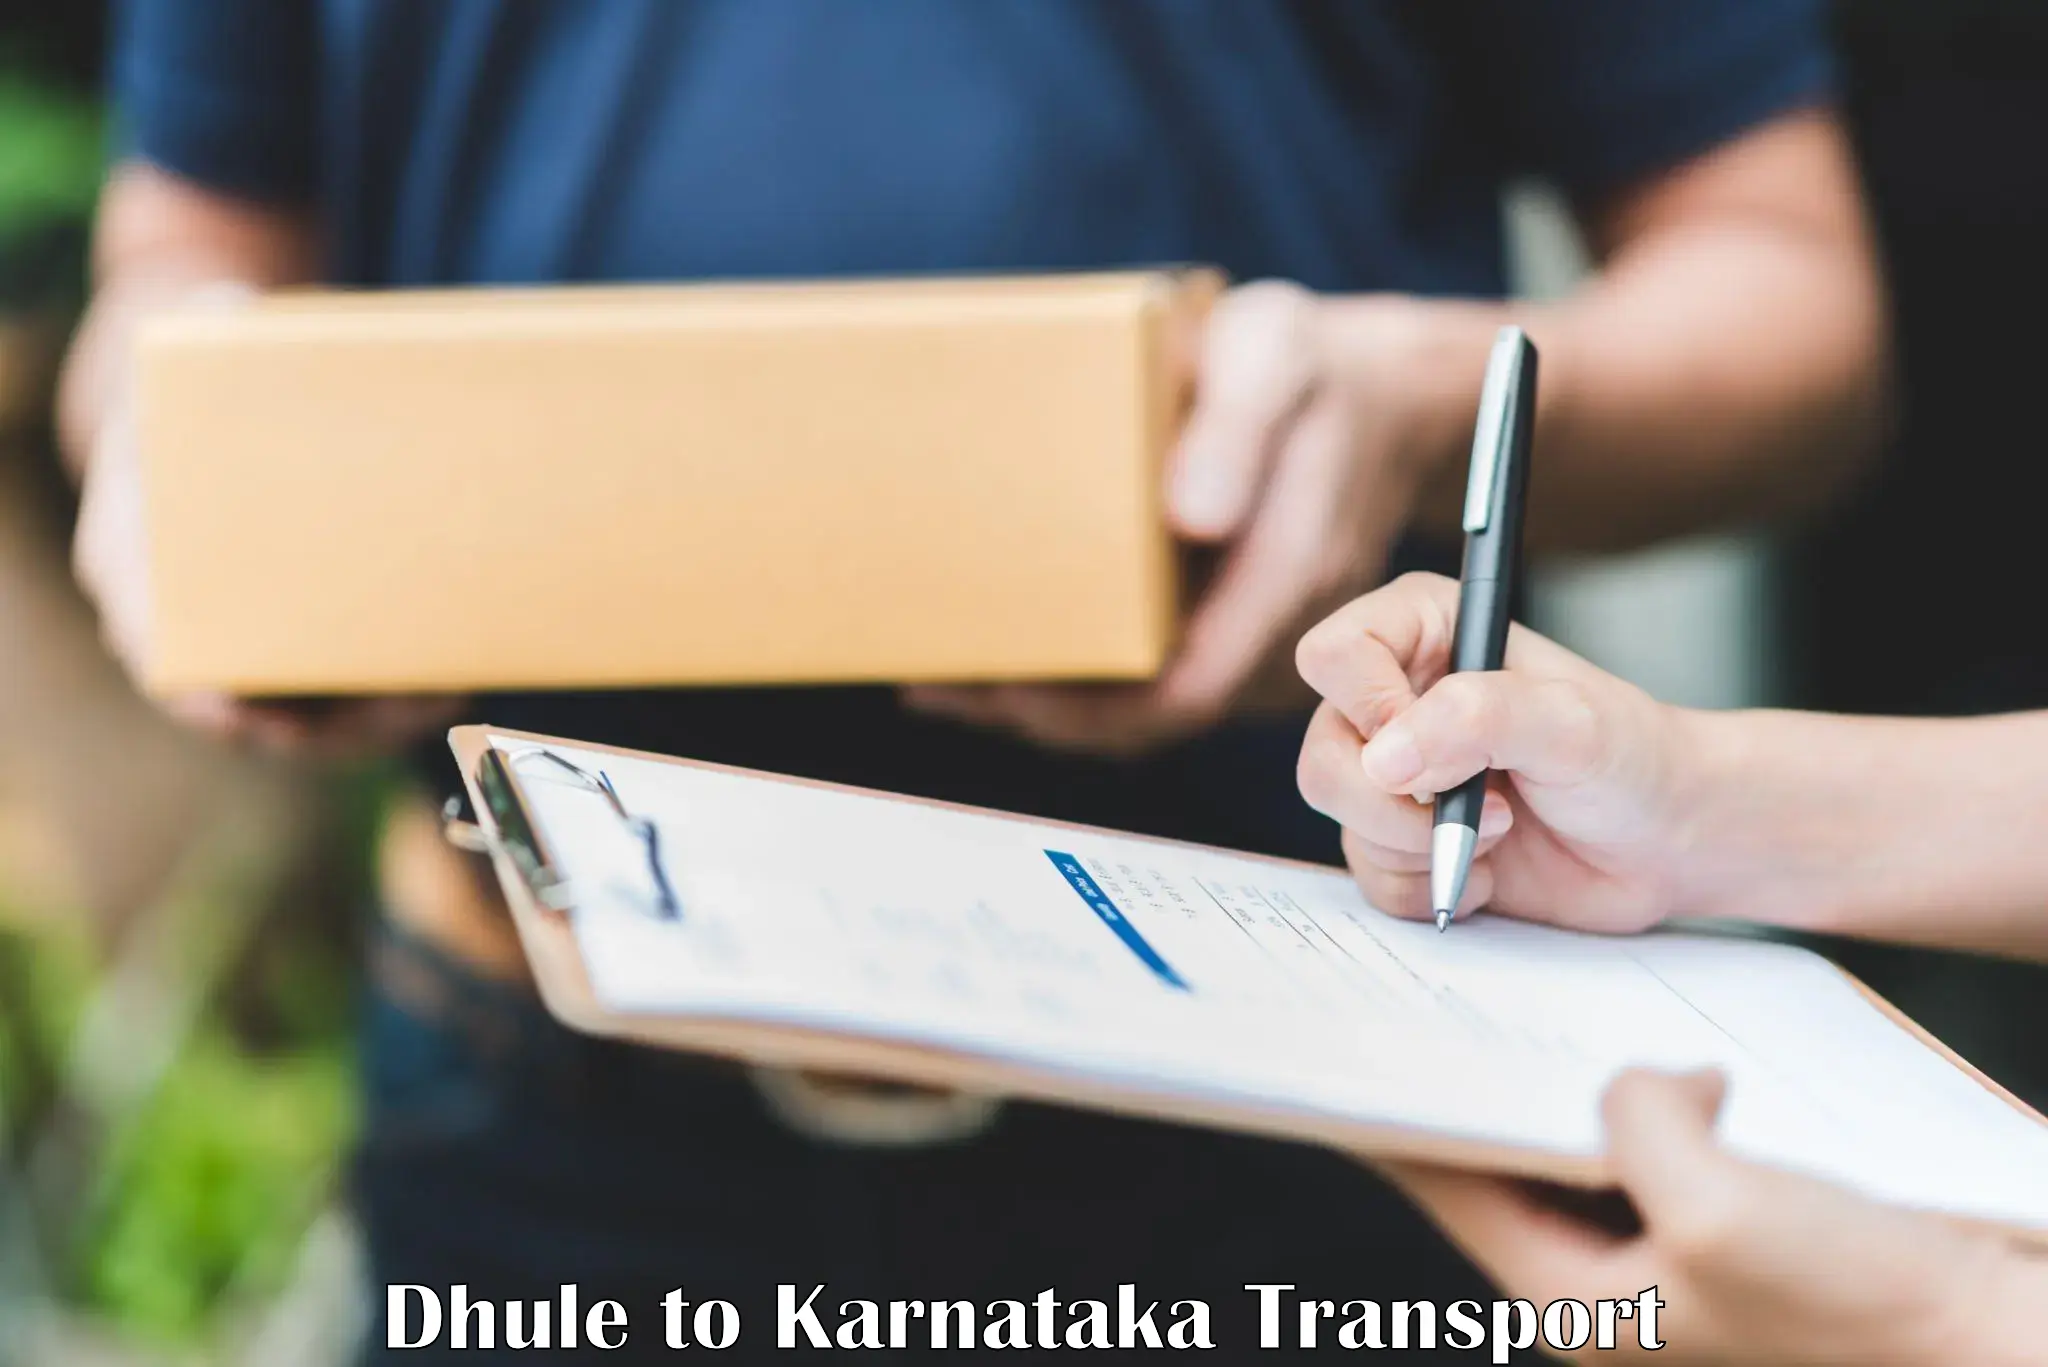 Daily transport service Dhule to Tumkur